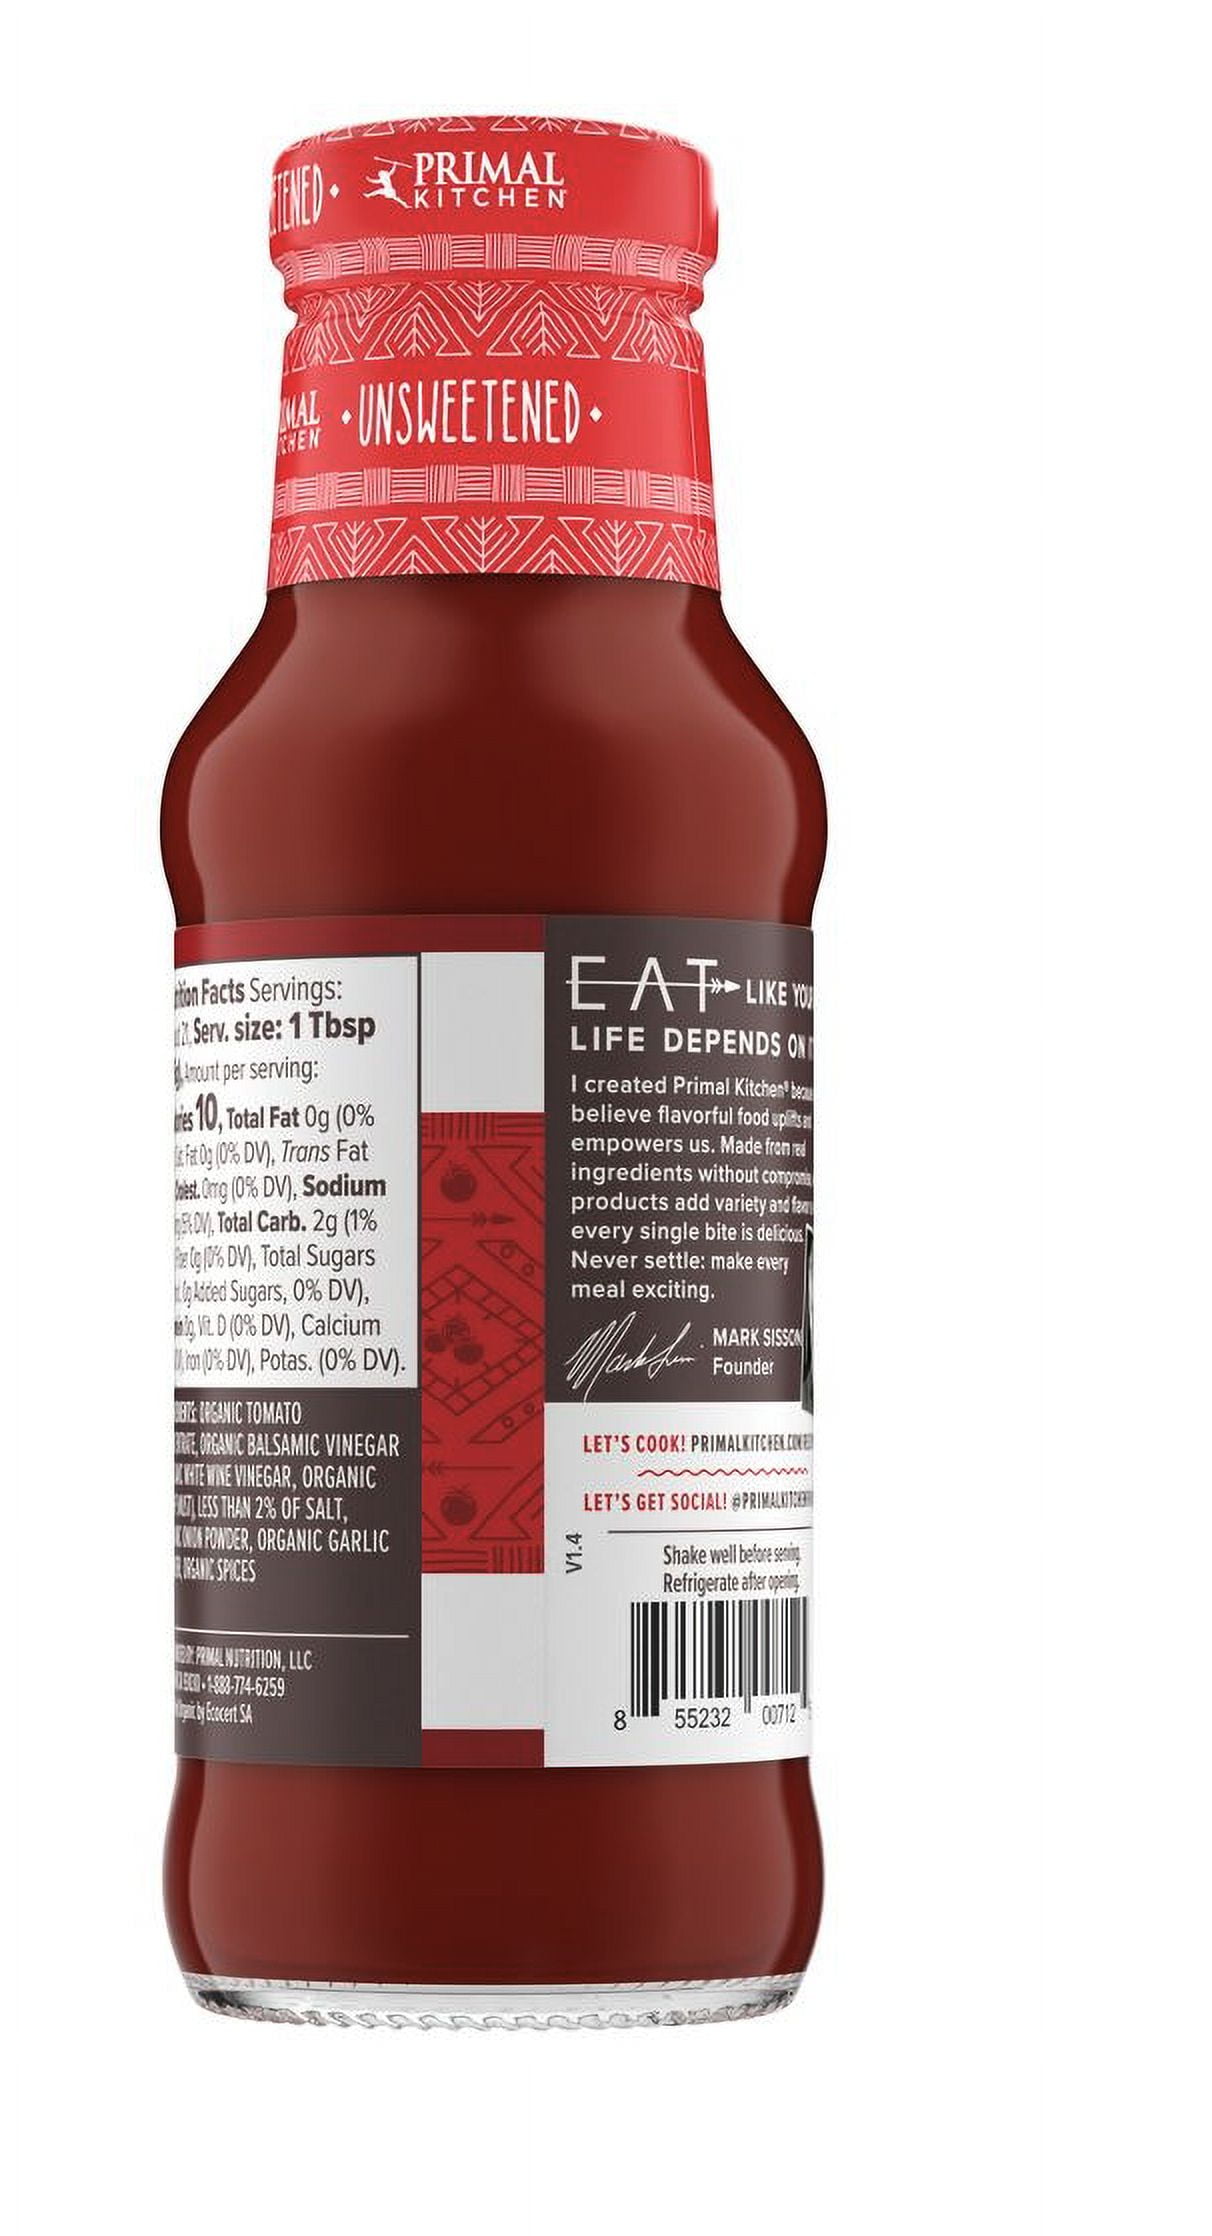 Primal Kitchen Organic and Unsweetened Ketchup 11.3 oz - Yahoo